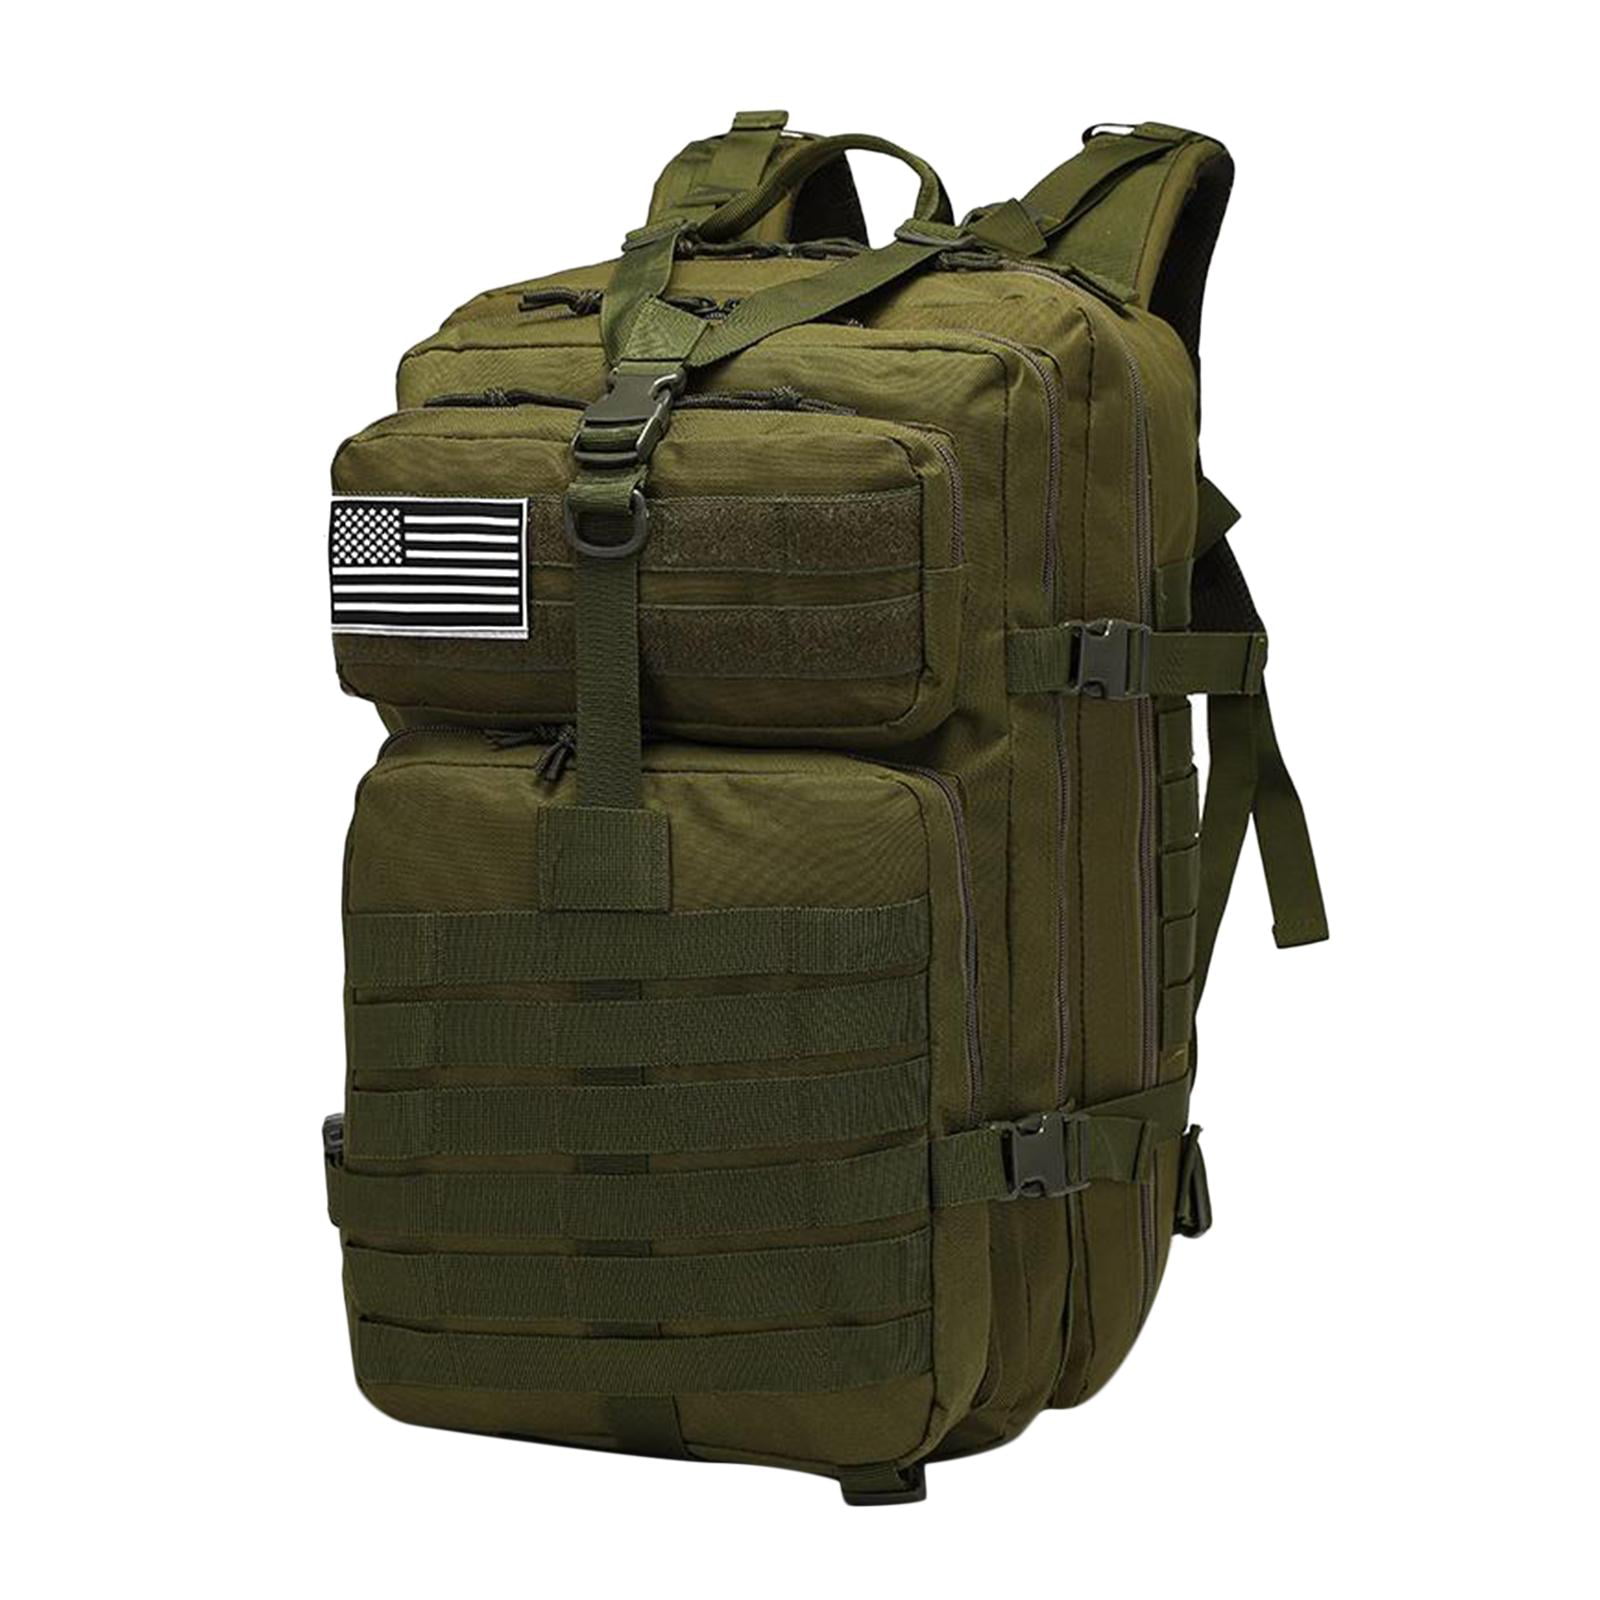 Hunting Hiking Tactical Molle Backpack Bow Archery Carry Bag Rucksack Pack 